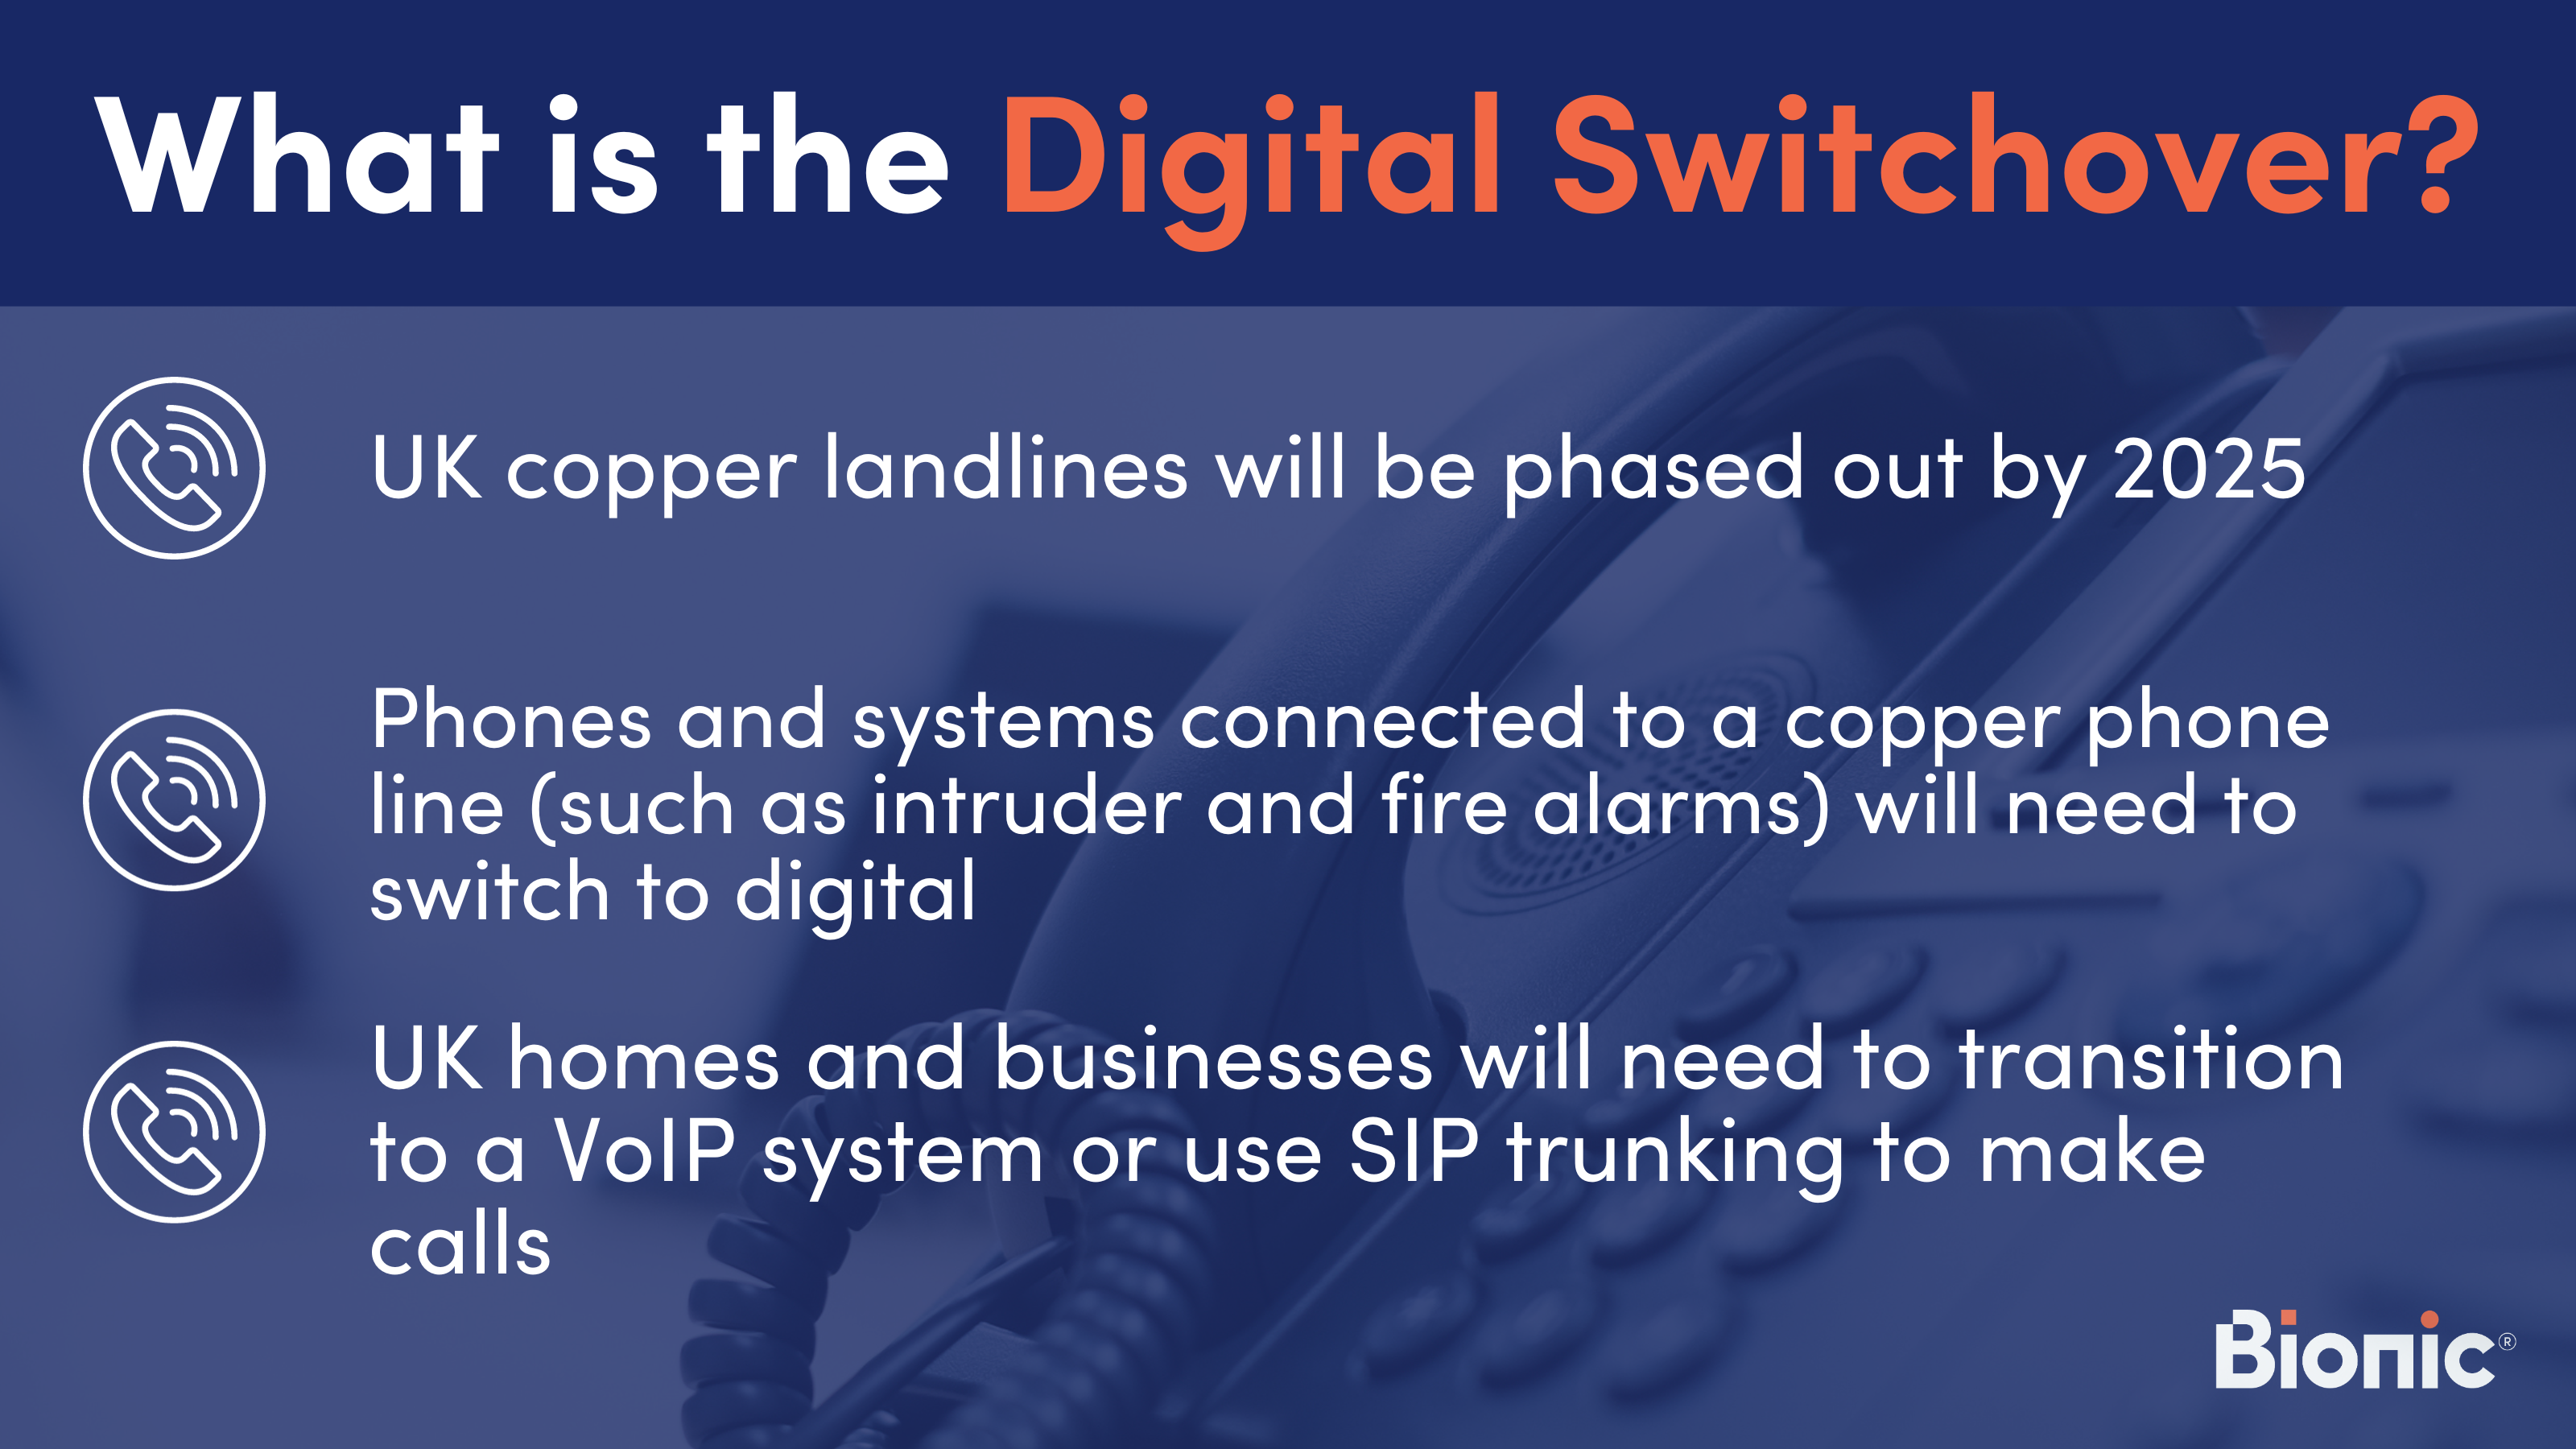 Infographic explaining the digital switchover taking place in 2025